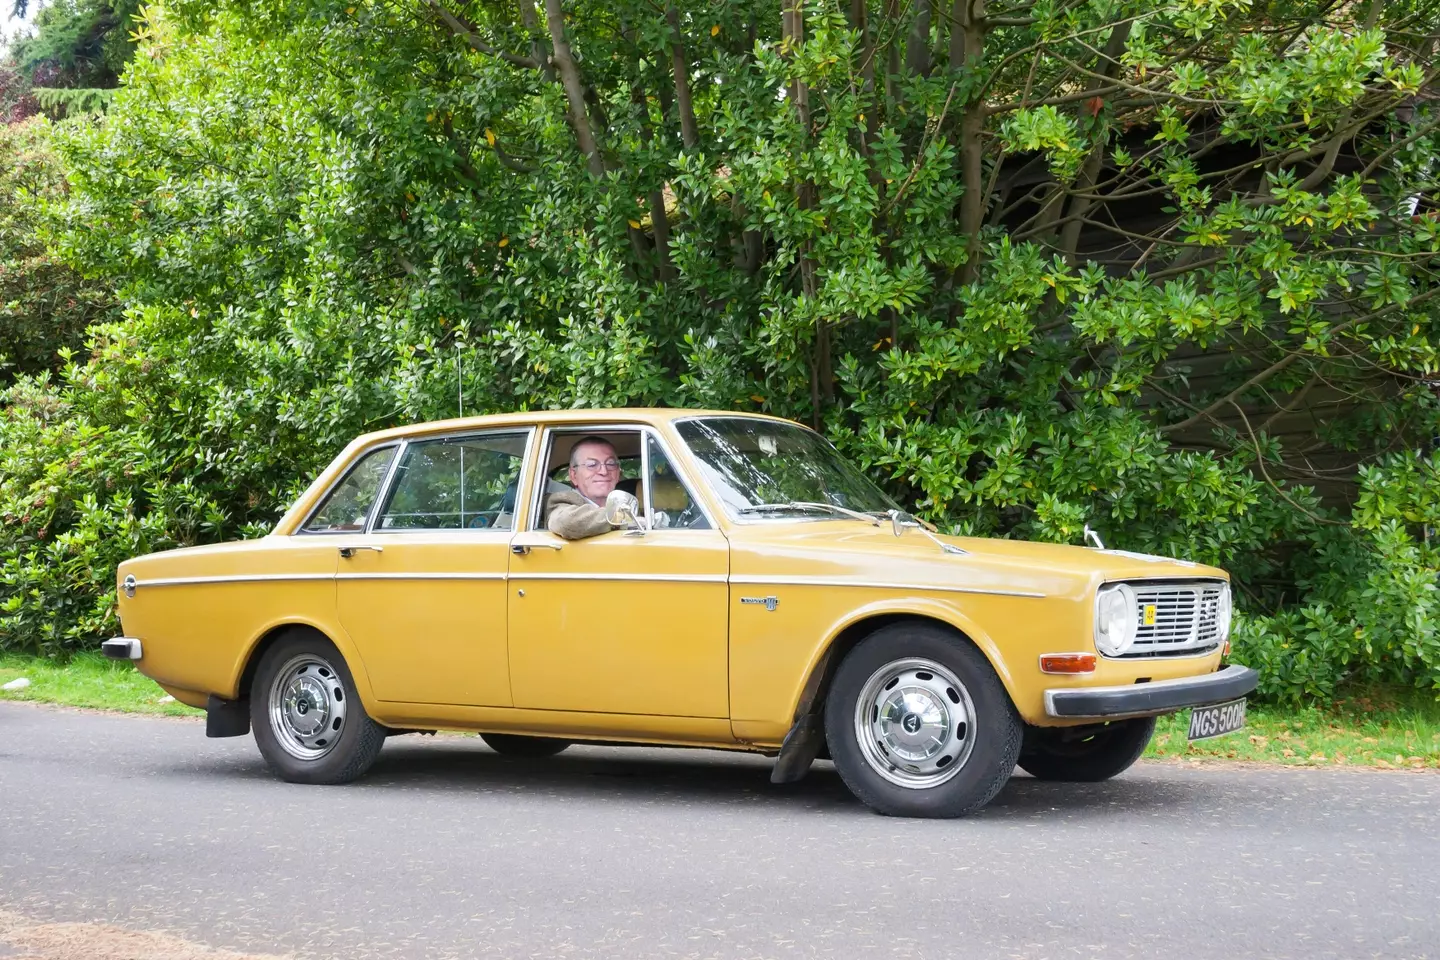 The Volvo 144 - there's 1,000 of these still rolling around North Korea which were never paid for.